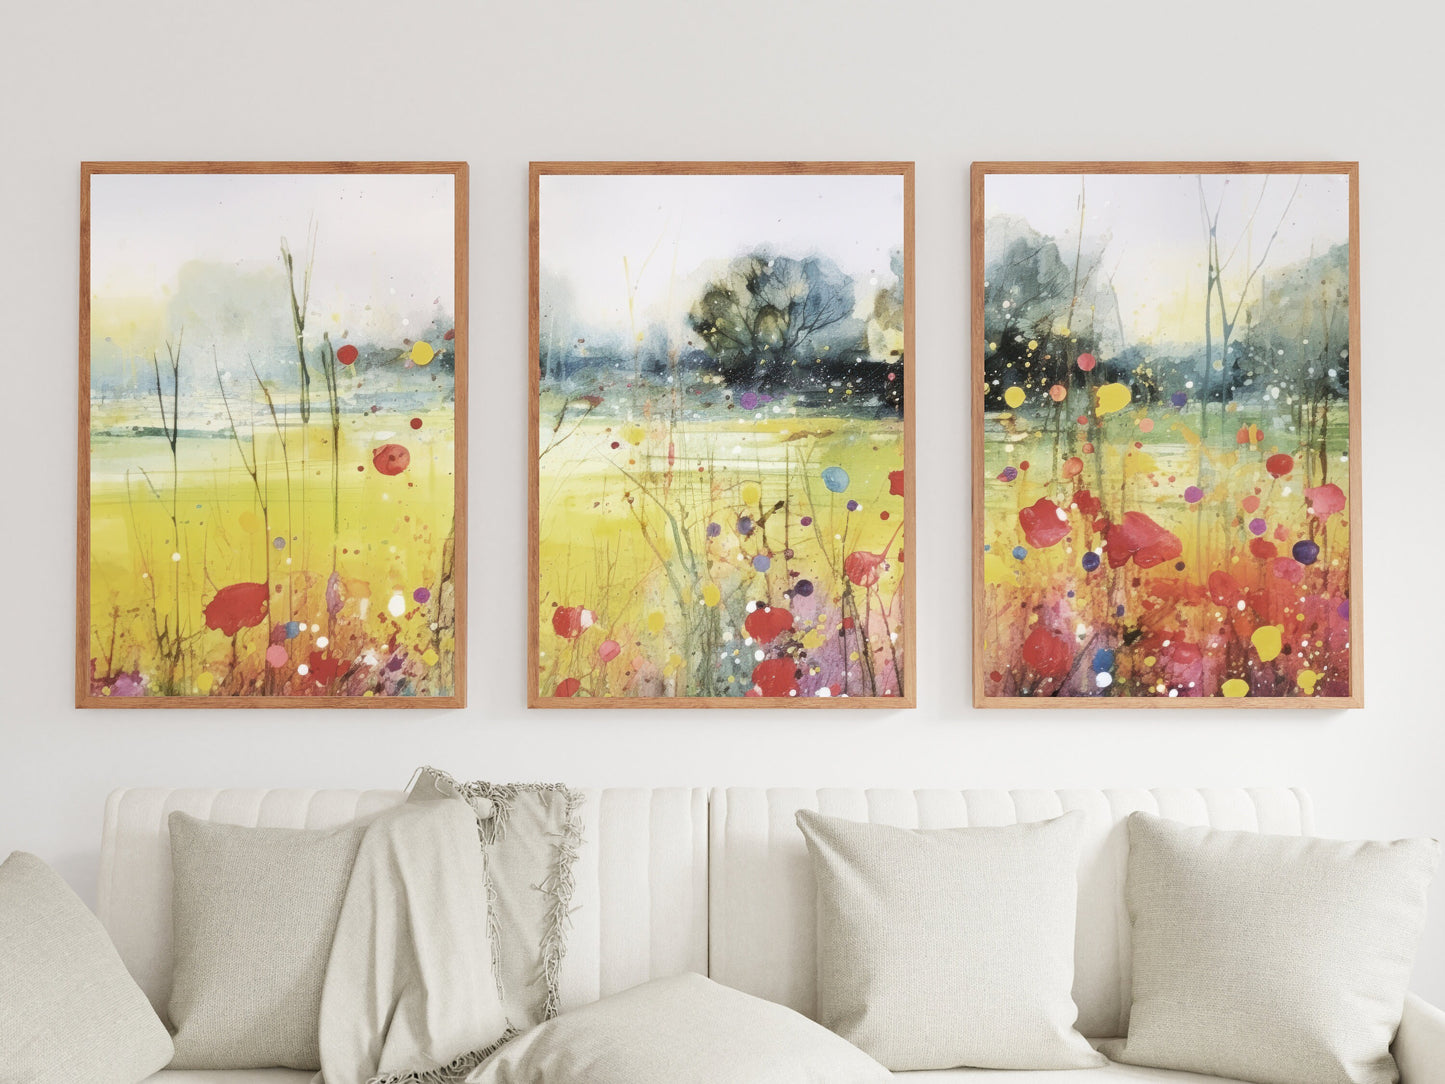 Wildflower Field Art Print, Set of 3, Watercolor Landscape Print, Flower Wall Art, Wildflower Meadow Painting, Printable Floral Wall Decor